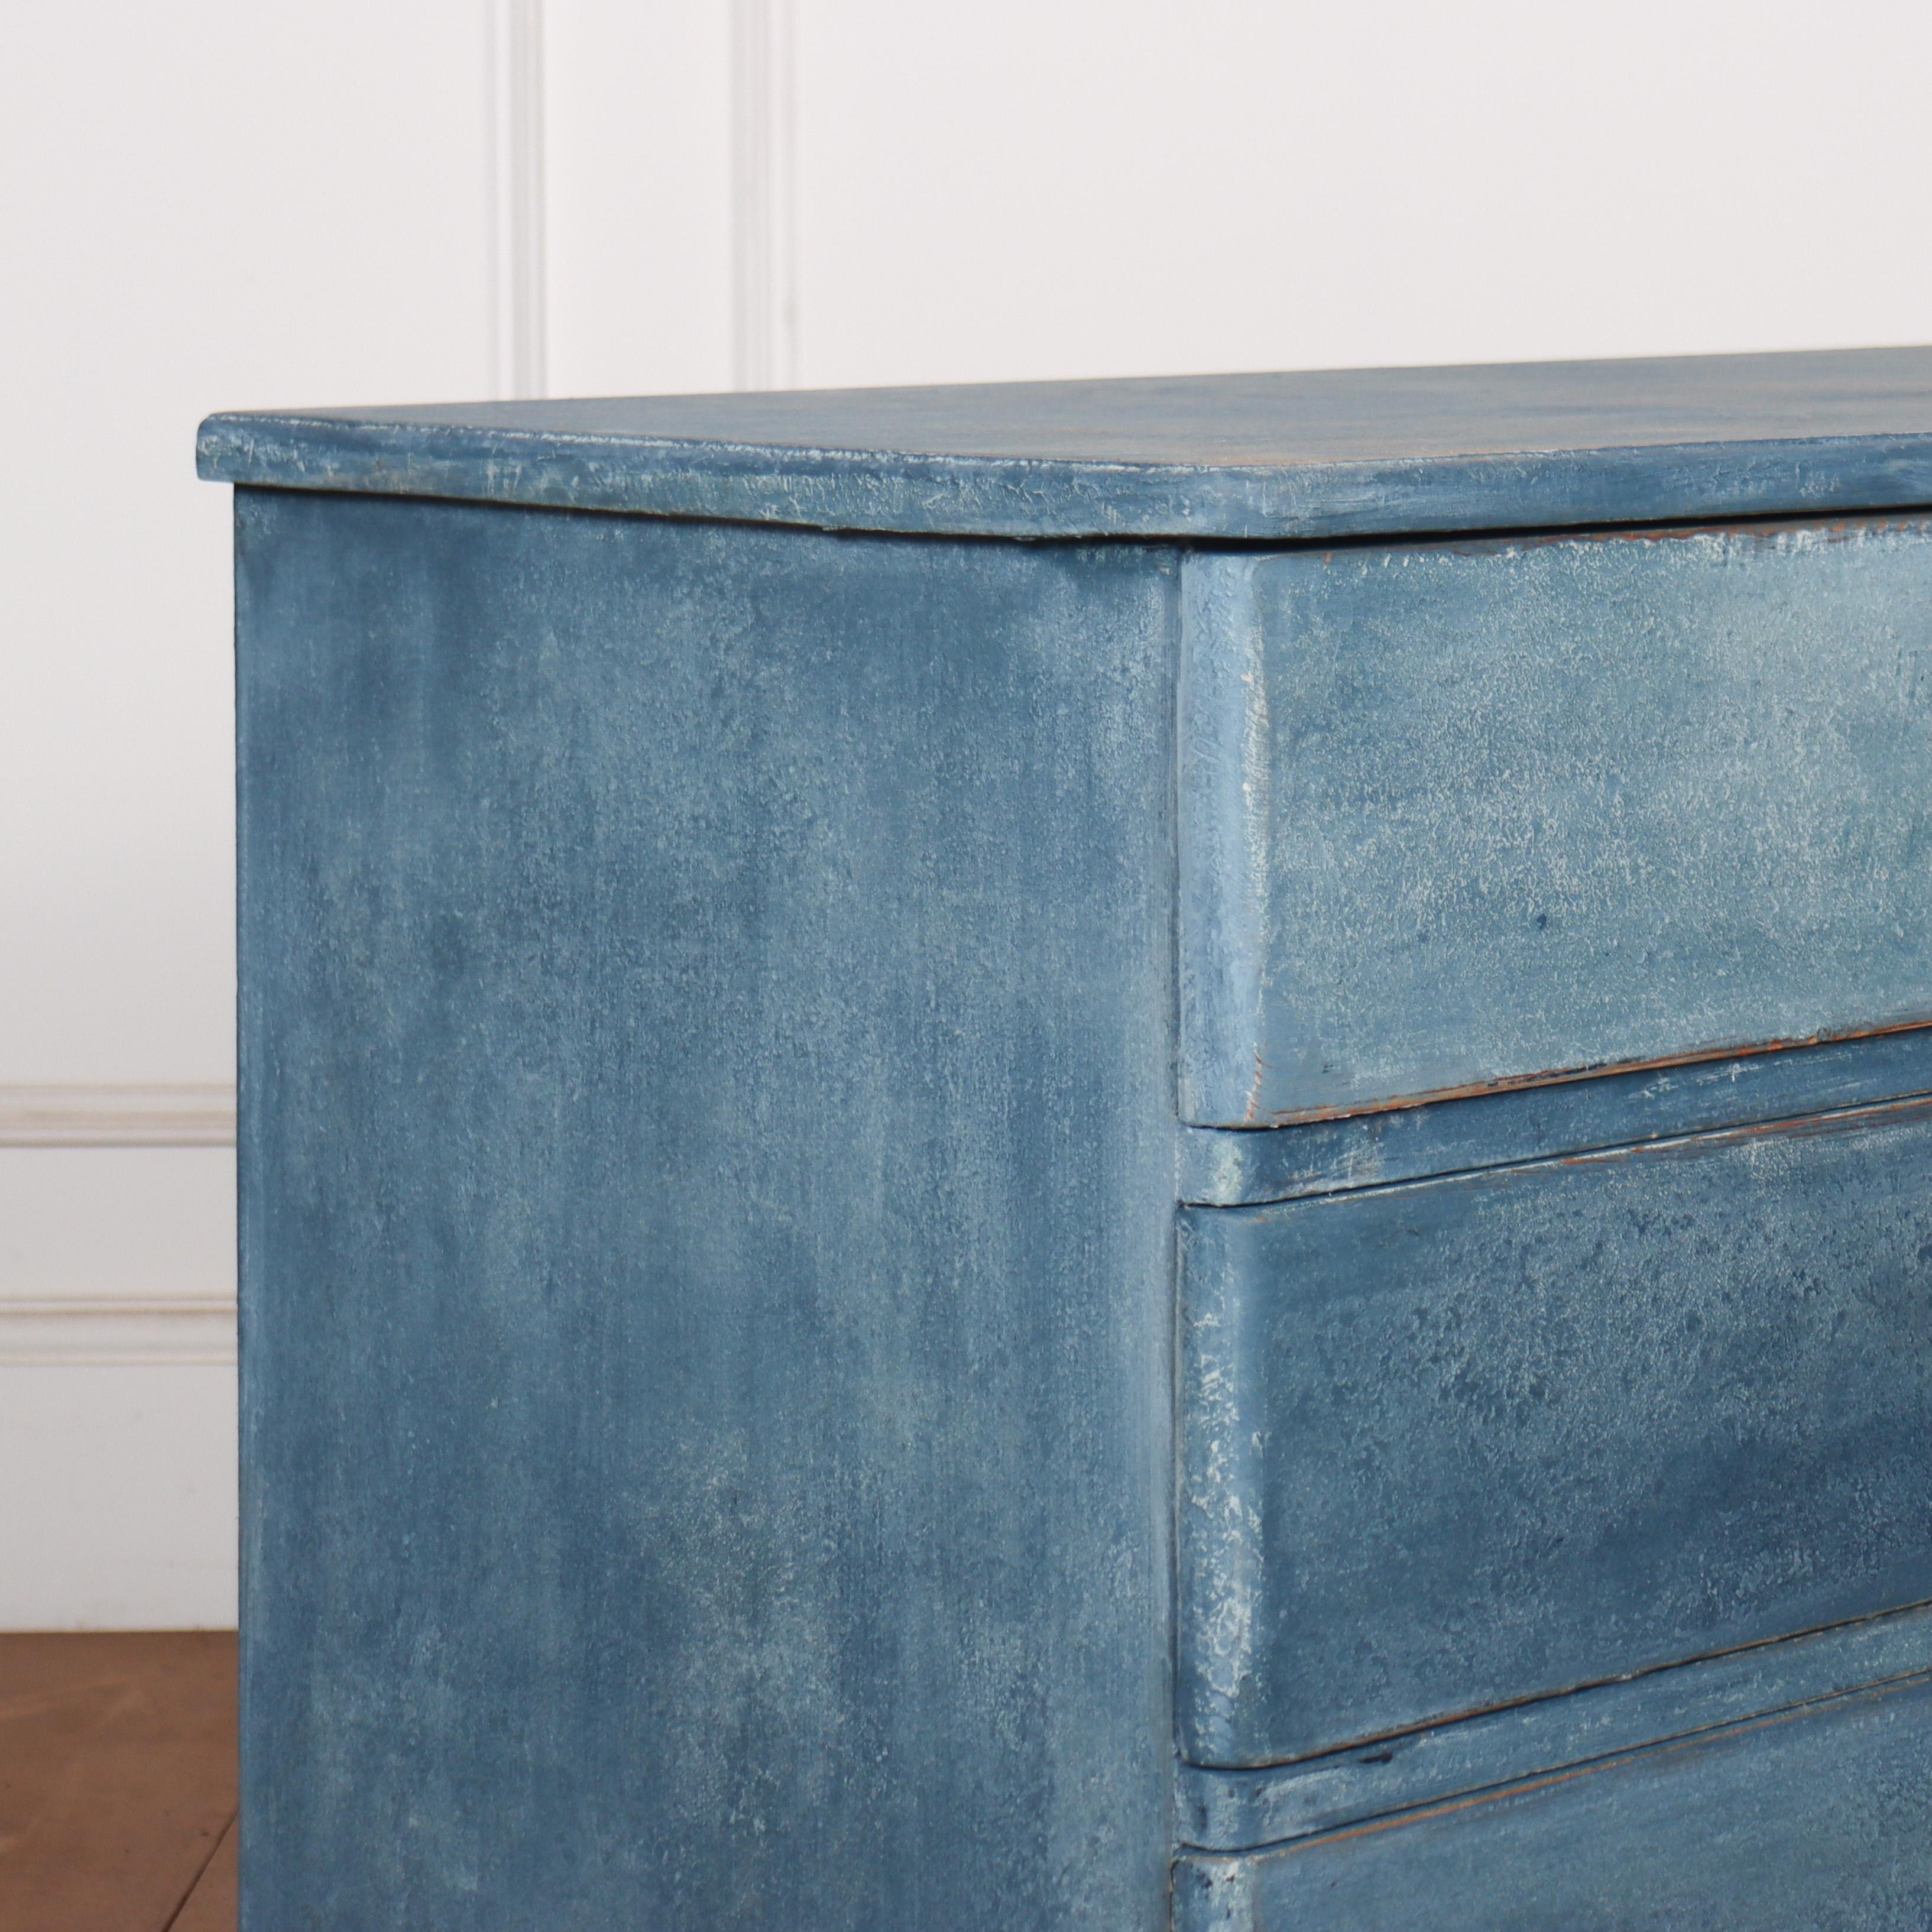 Early 20th C Swedish painted pine three drawer commode. 1930.

Reference: 8213

Dimensions
40 inches (102 cms) Wide
17.5 inches (44 cms) Deep
27 inches (69 cms) High